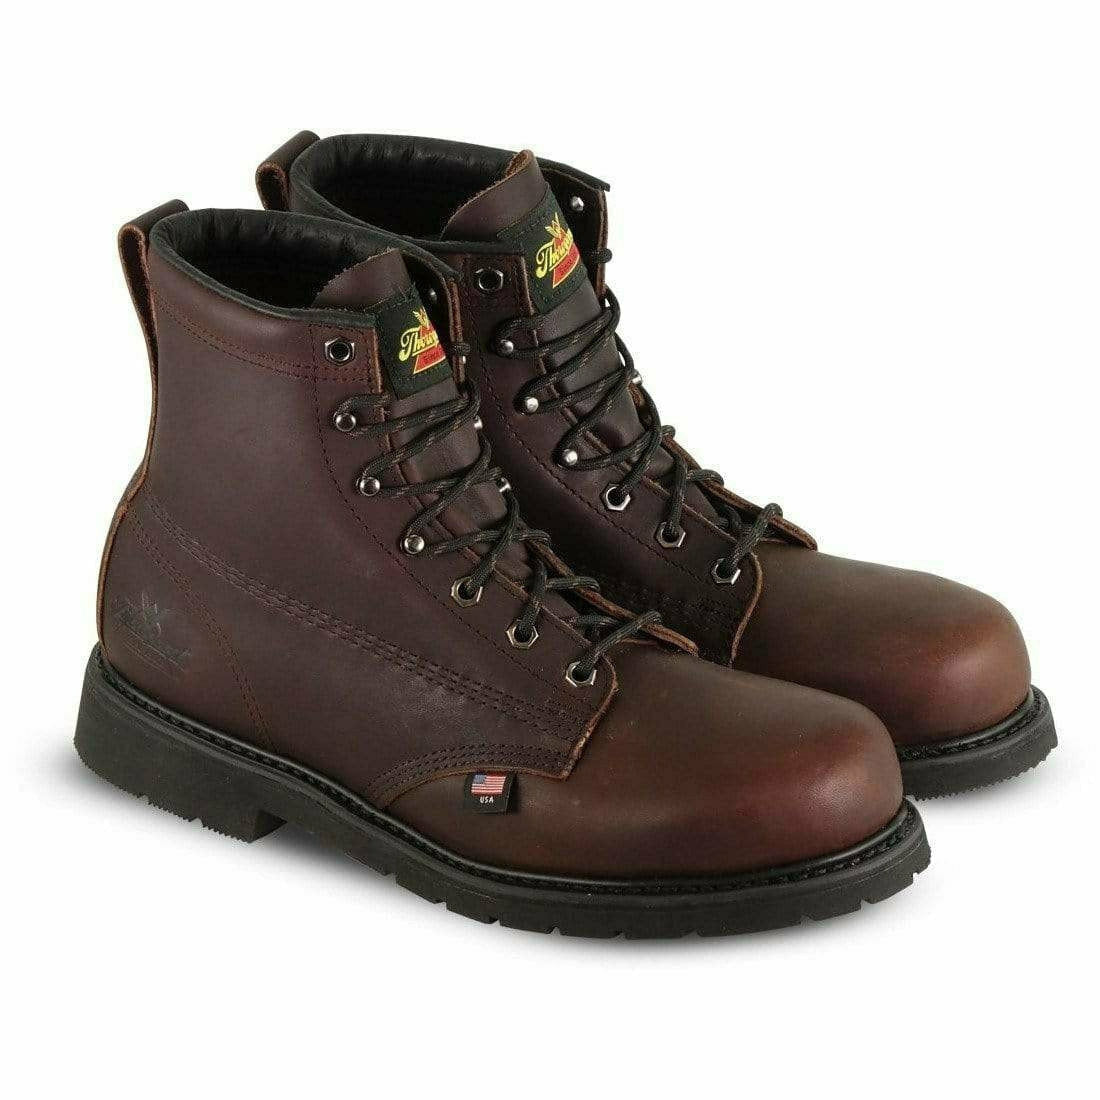 Safety Toe 6in Round Toe Boots 